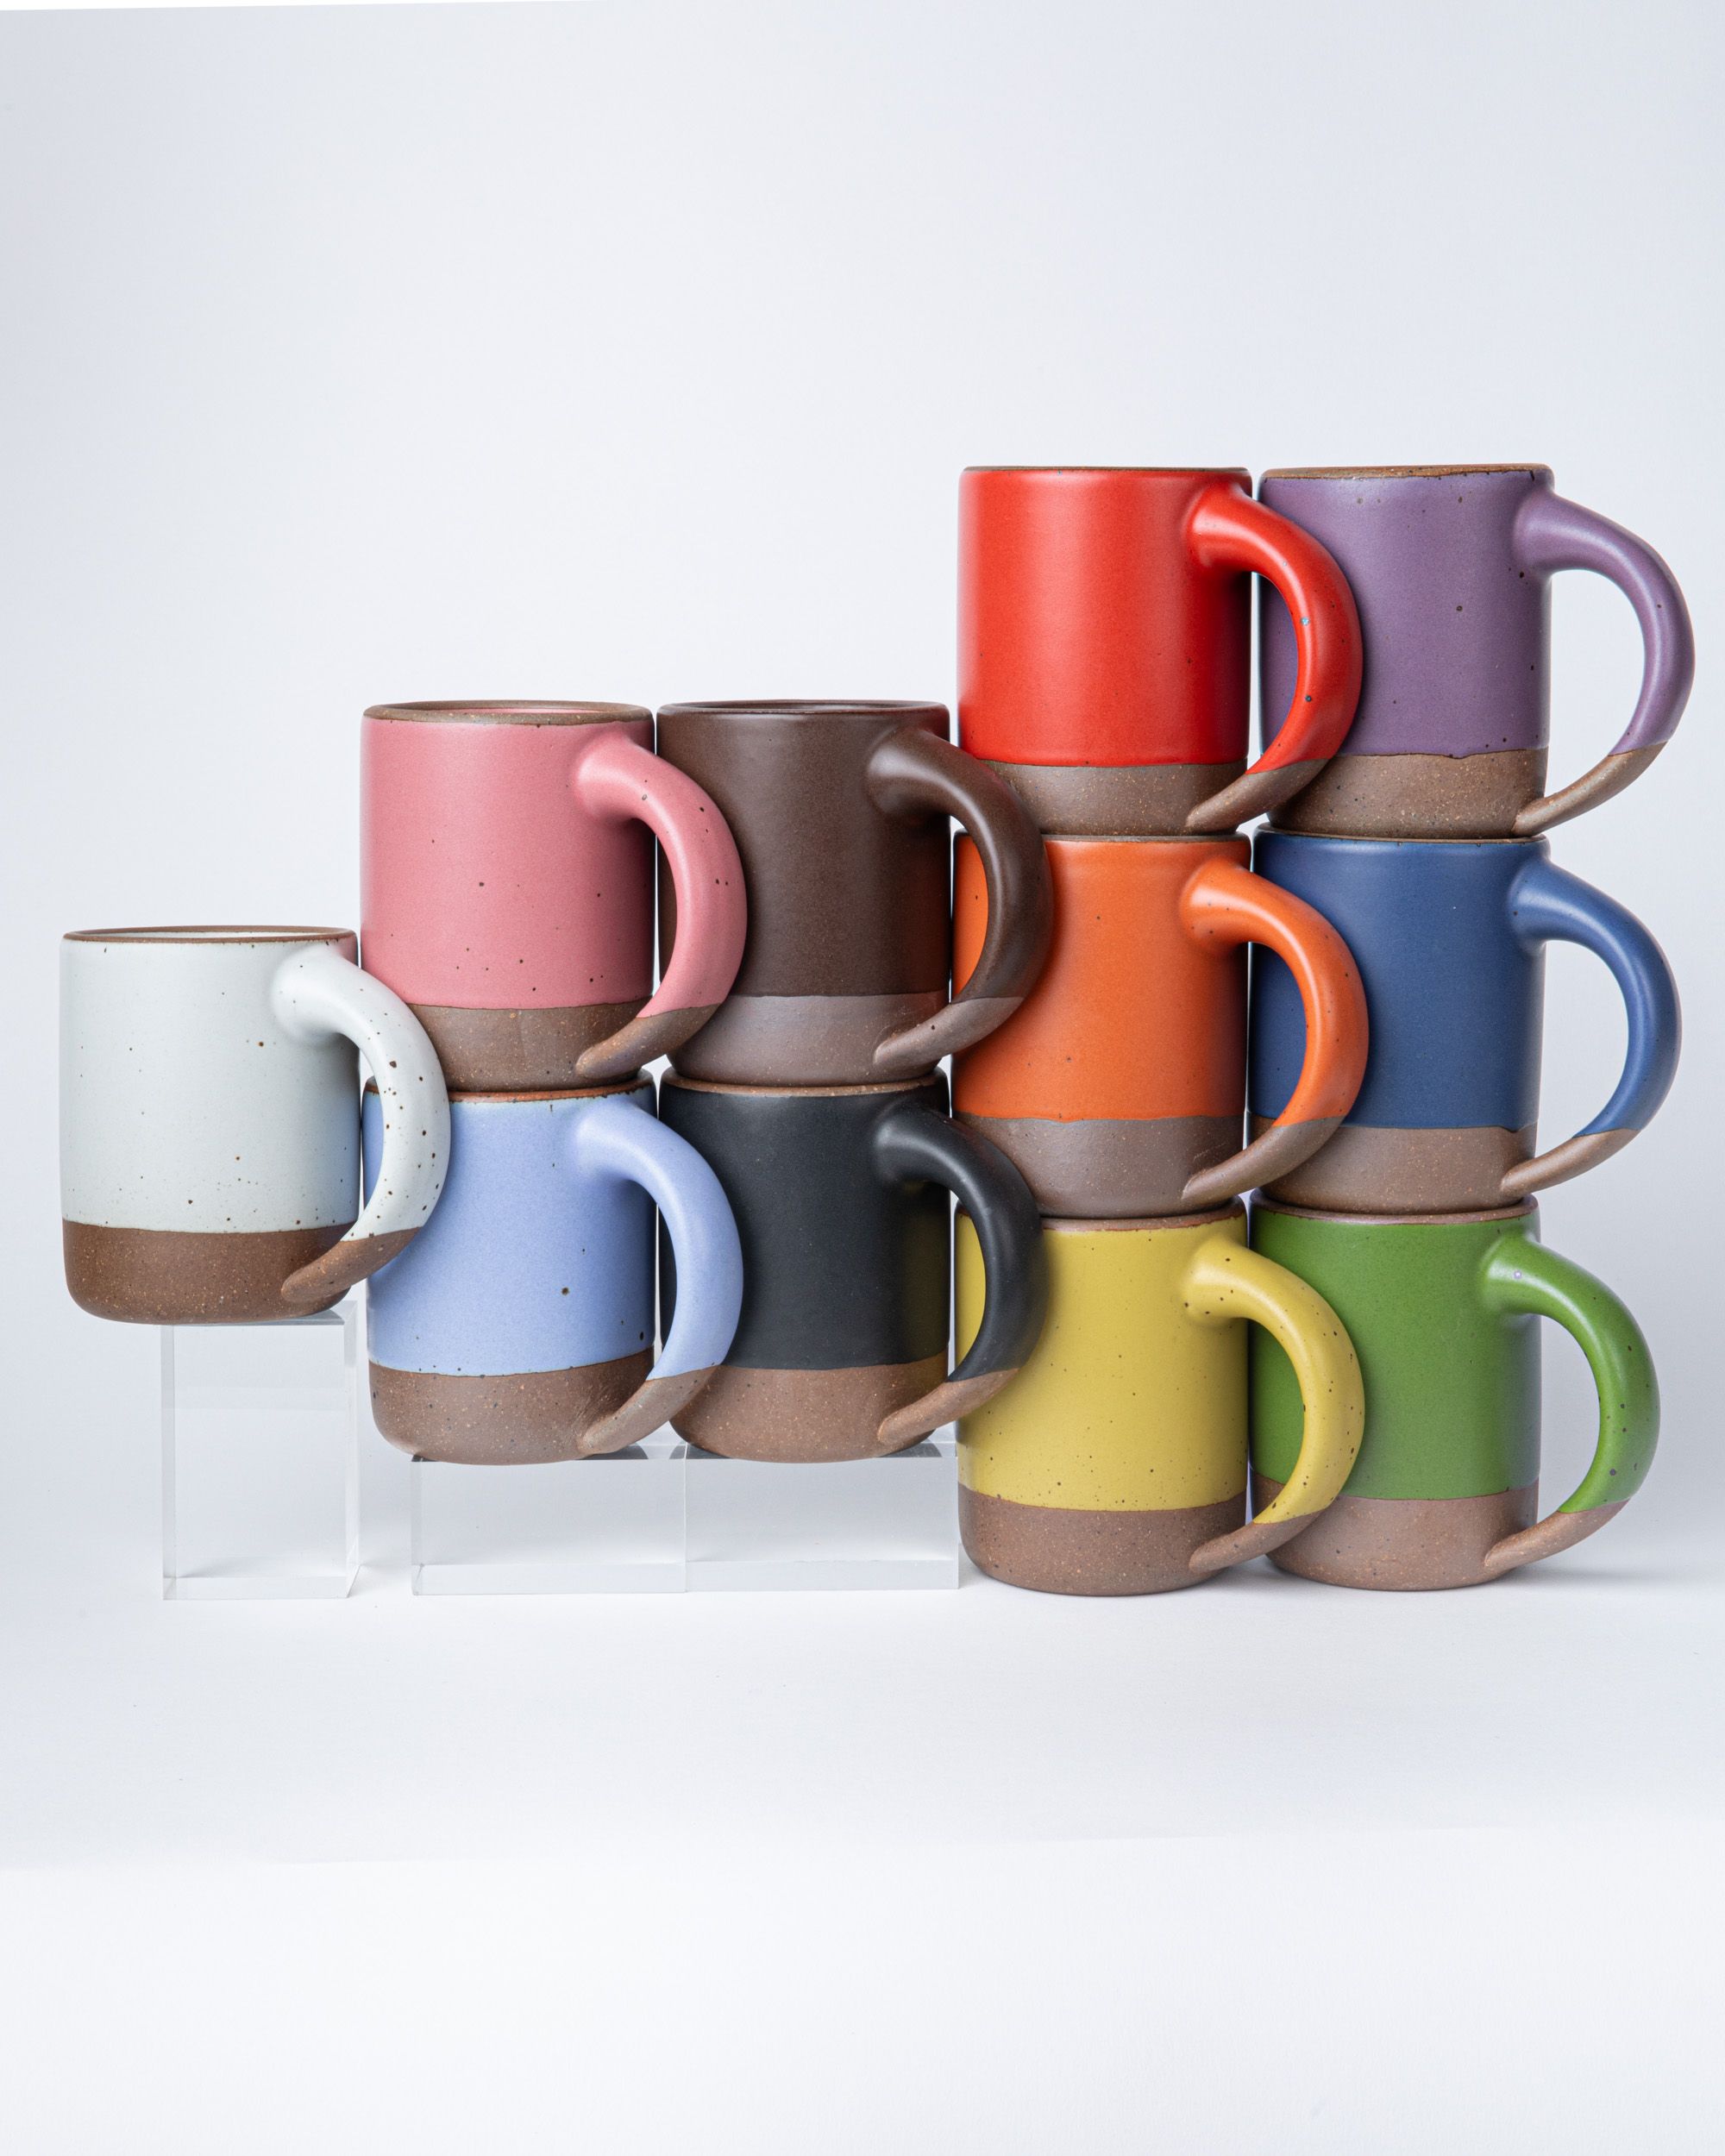 Colorful ceramic mugs are formed in a triangle to symbolize the Progress Pride flag.